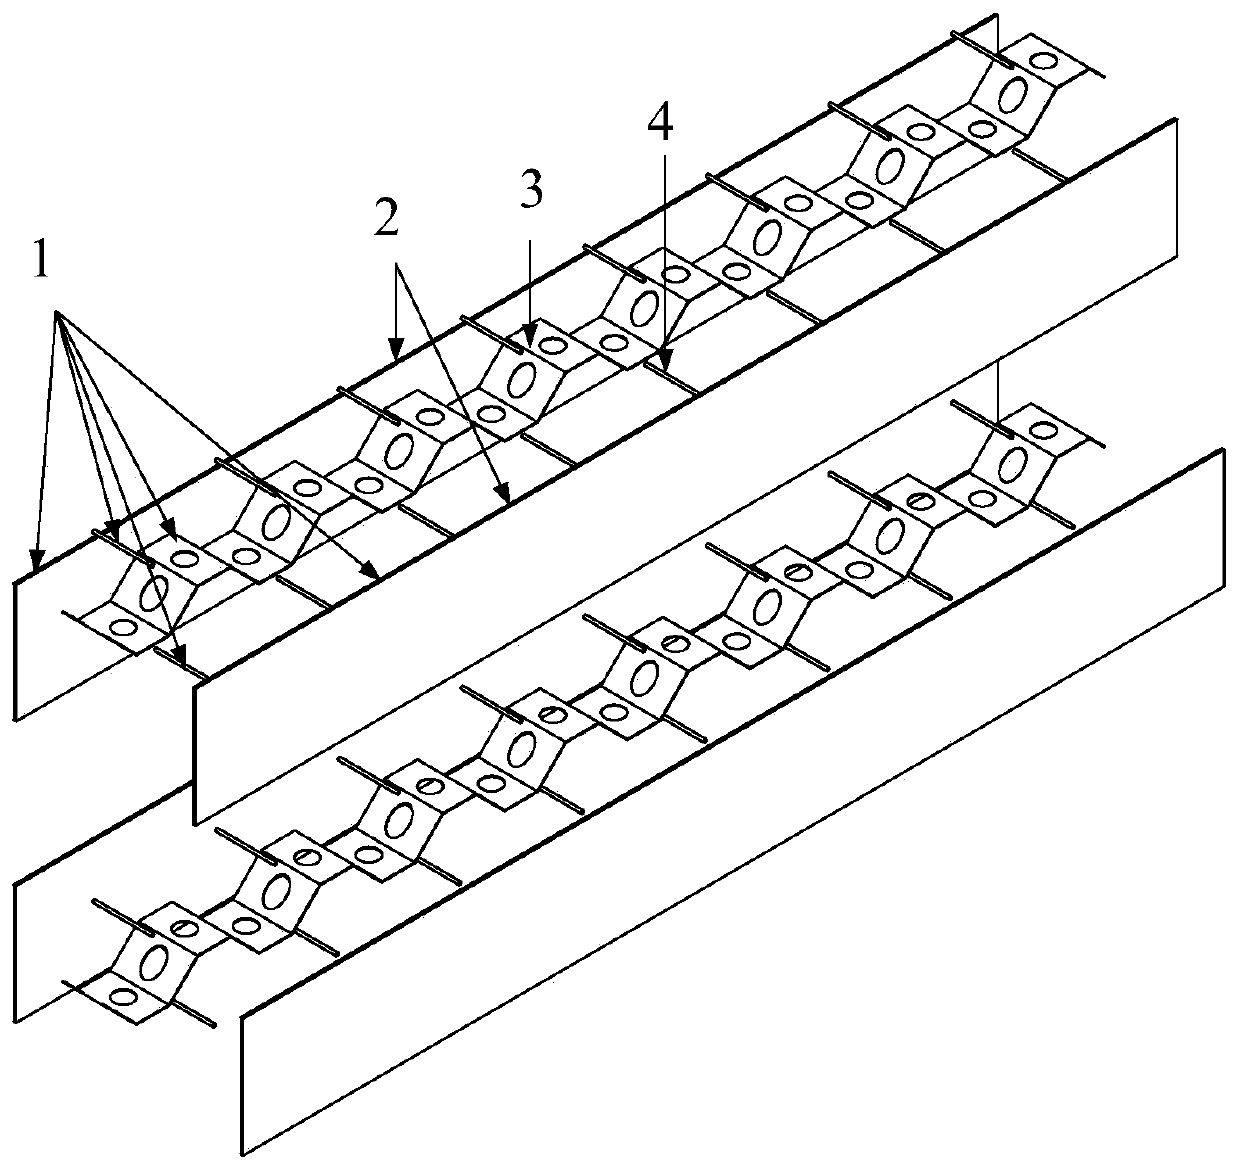 Double-layer steel plate combined shear wall with transverse hole-forming corrugated web